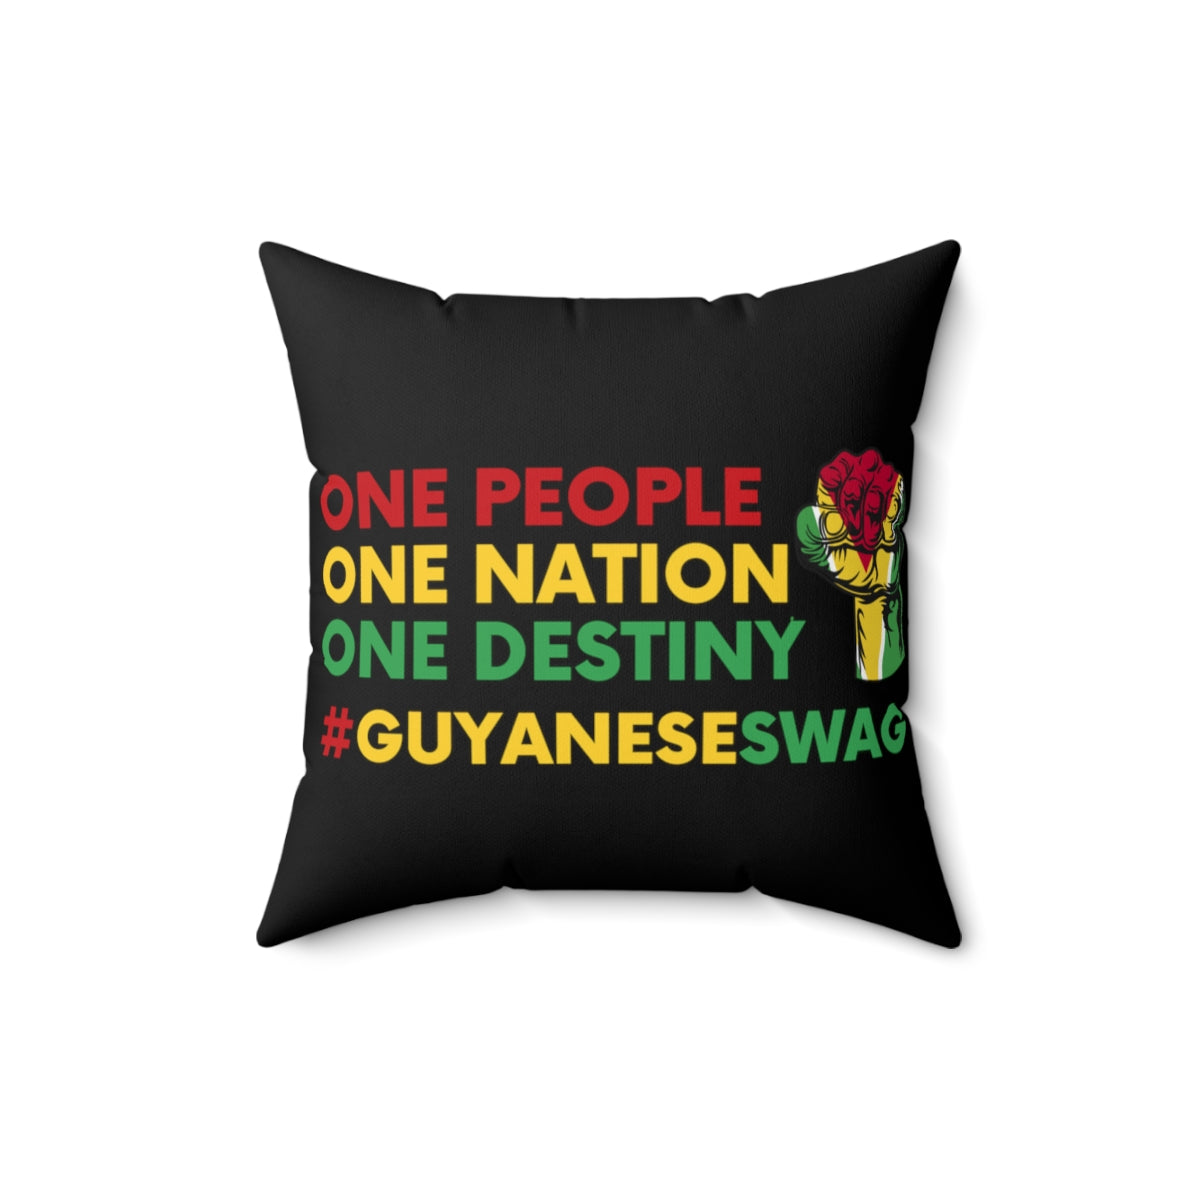 One People One Nation One Destiny Spun Polyester Square Pillow.